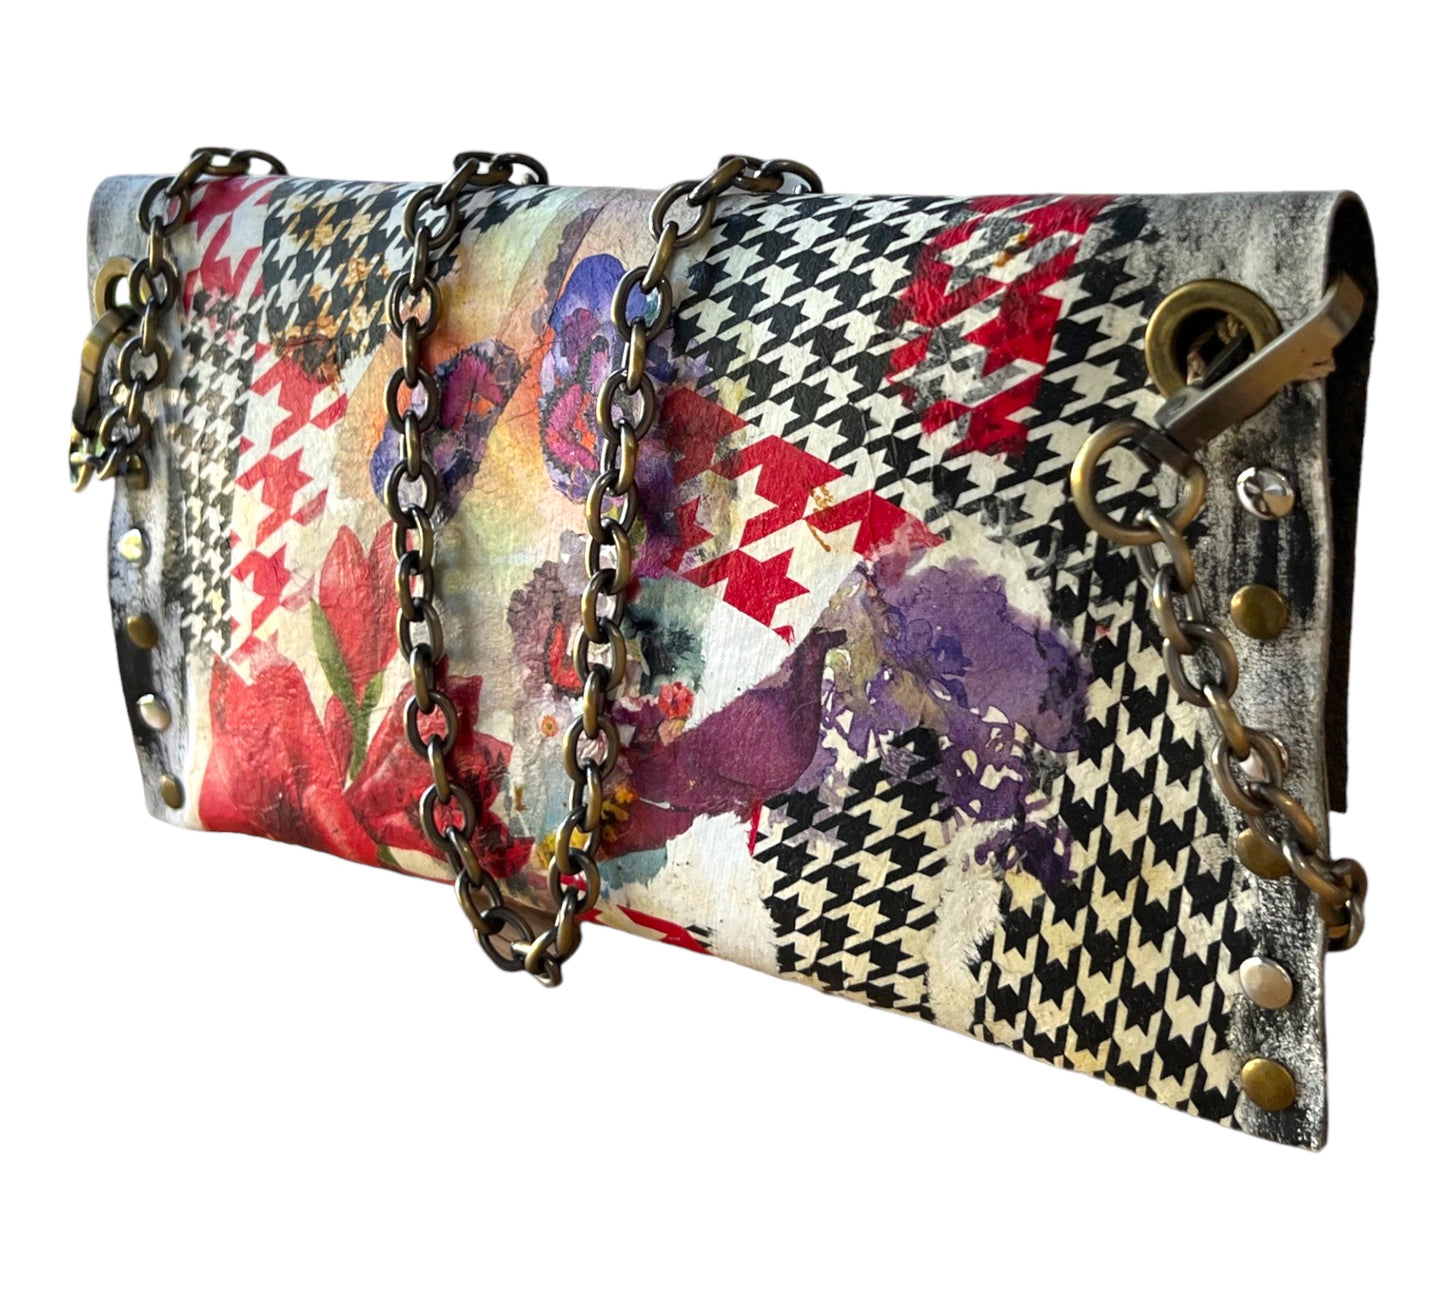 Checkered Pattern and Red Flowers Leather Handbag